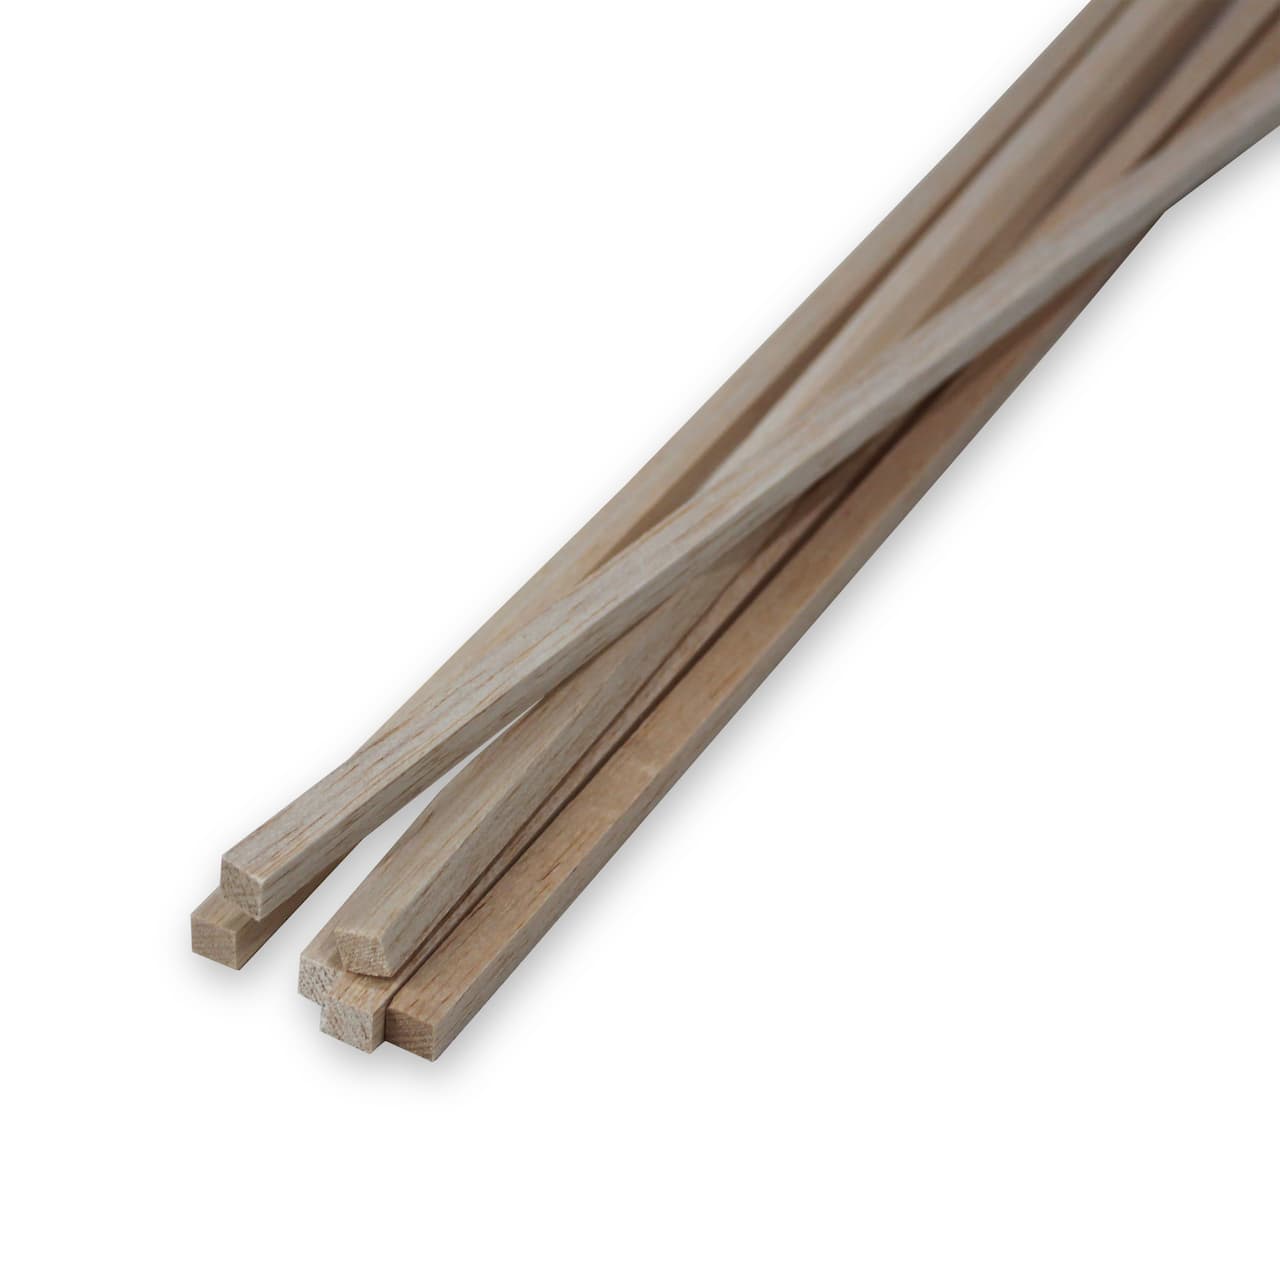 Guillow's Balsa Wood Square Dowels - 3/8 x 36 in